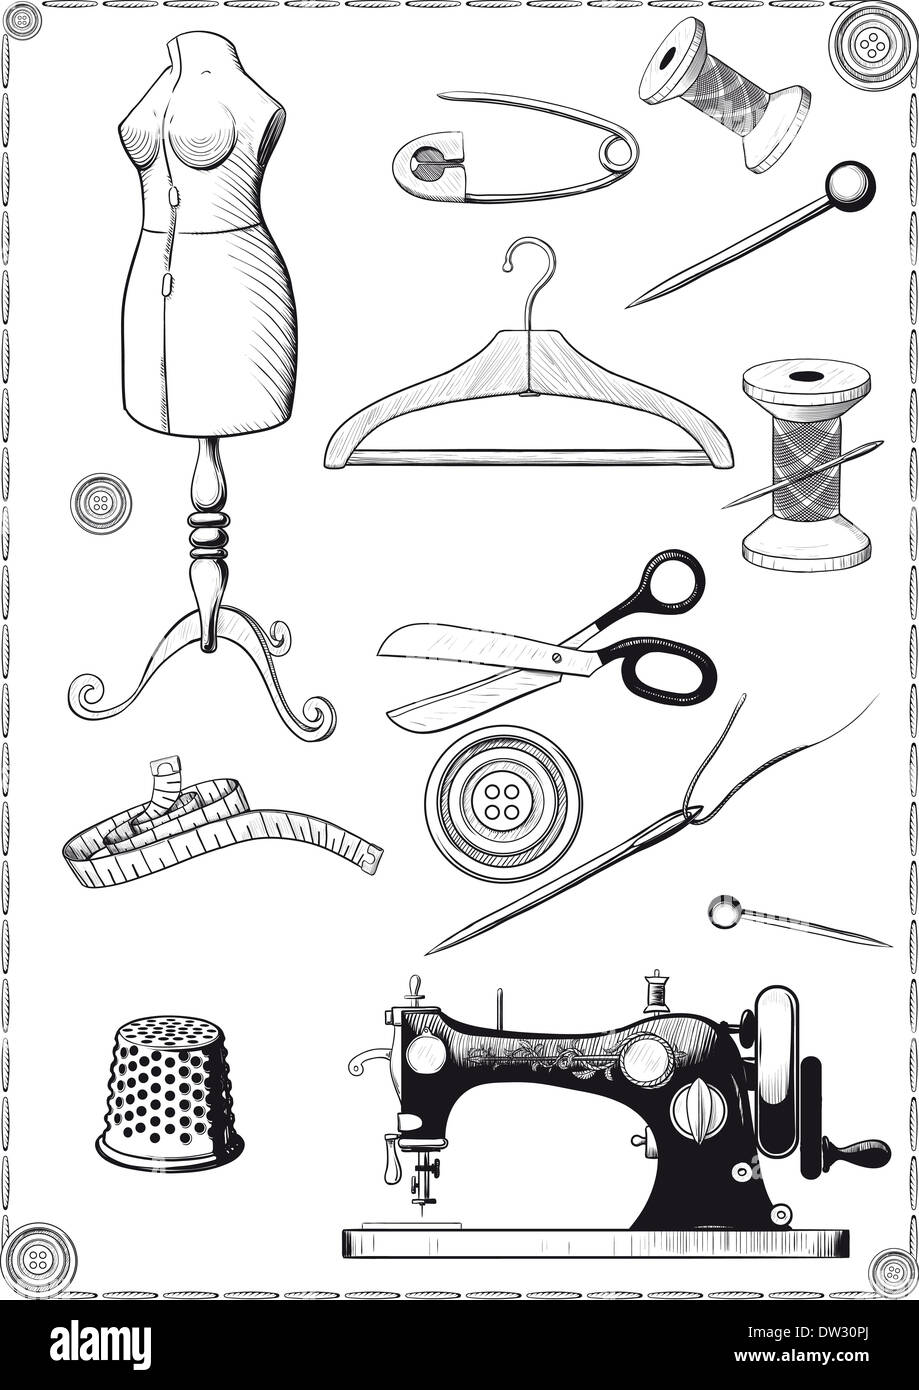 Sewing Accessories Stock Photo